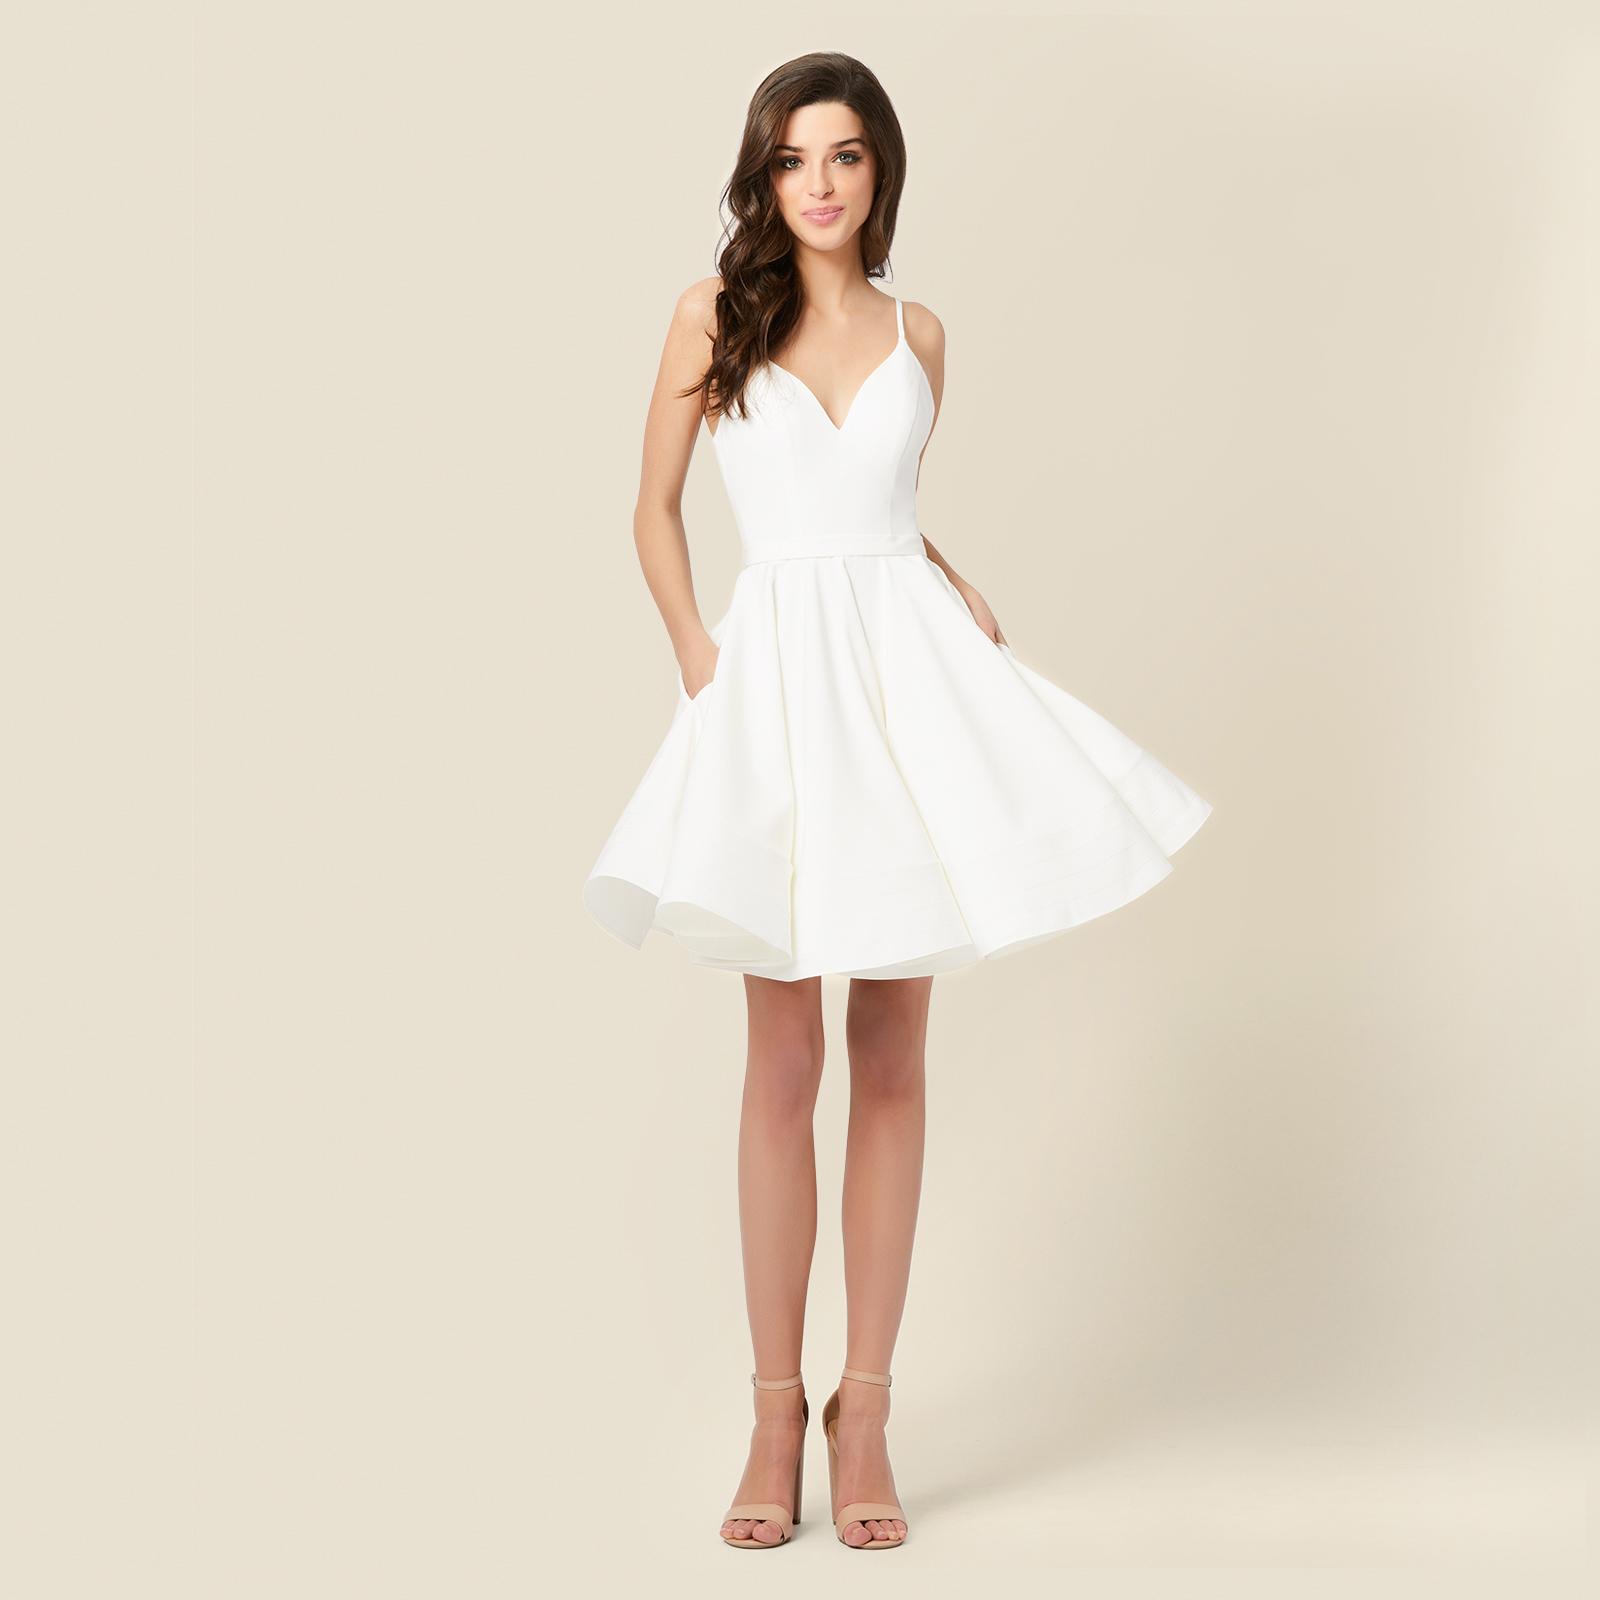 sweetheart neckline fit and flare dress